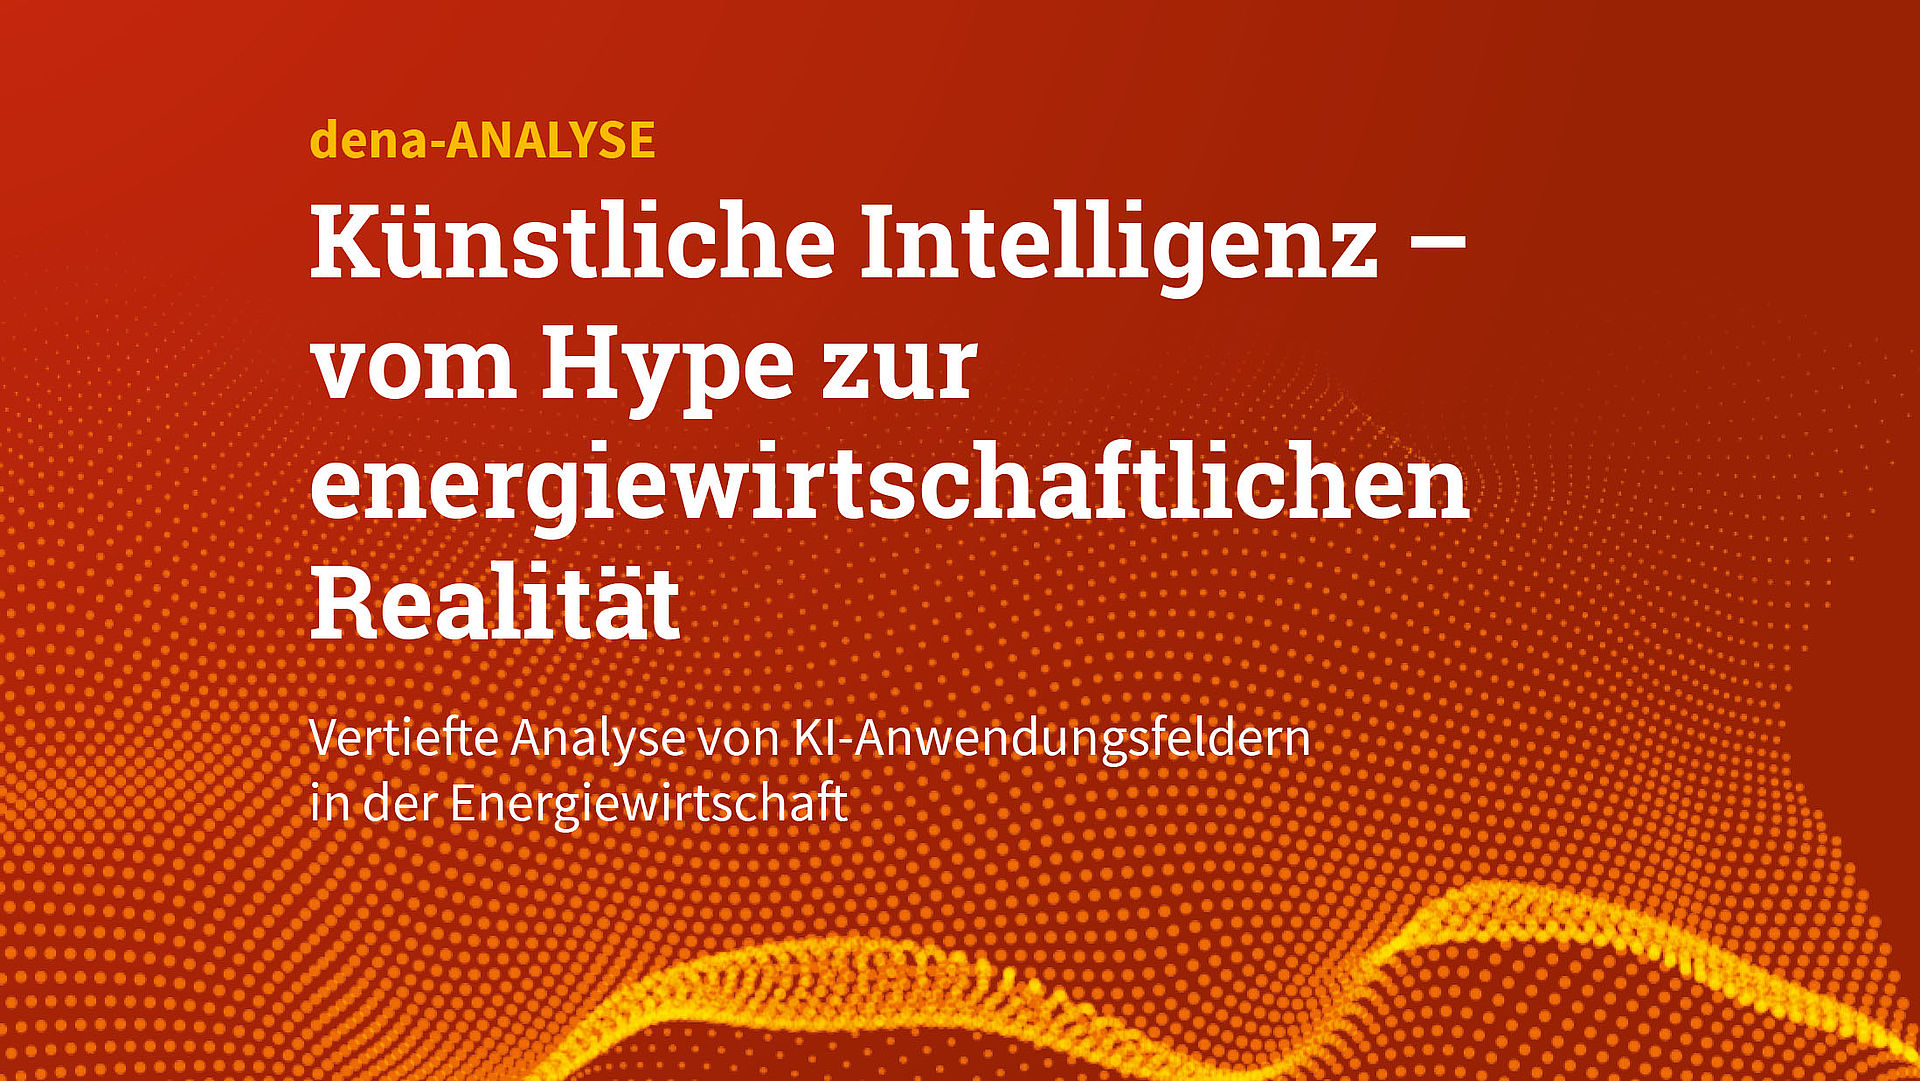 Dena Analysis Testing And Seizing Artificial Intelligence Opportunities For The Integrated Energy Transition Deutsche Energie Agentur Dena